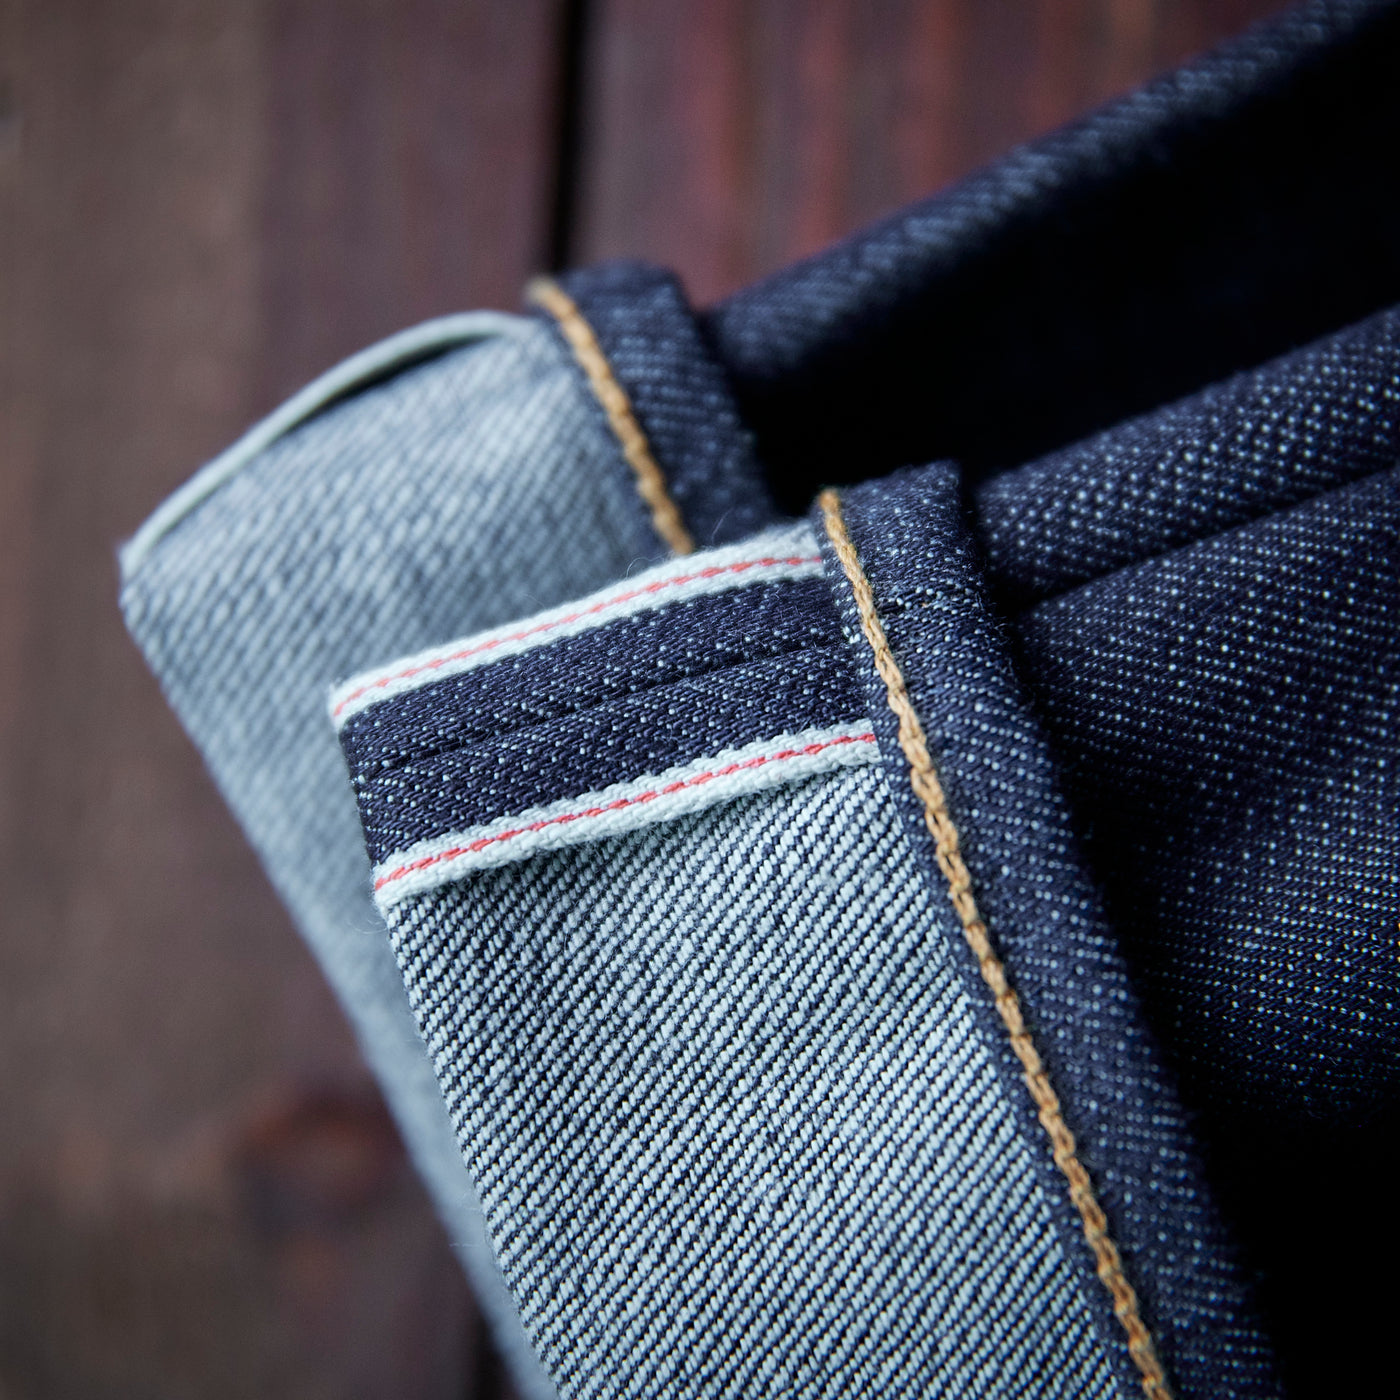 Edwin - ED-47 - 14oz Japanese Red Listed Selvage Denim